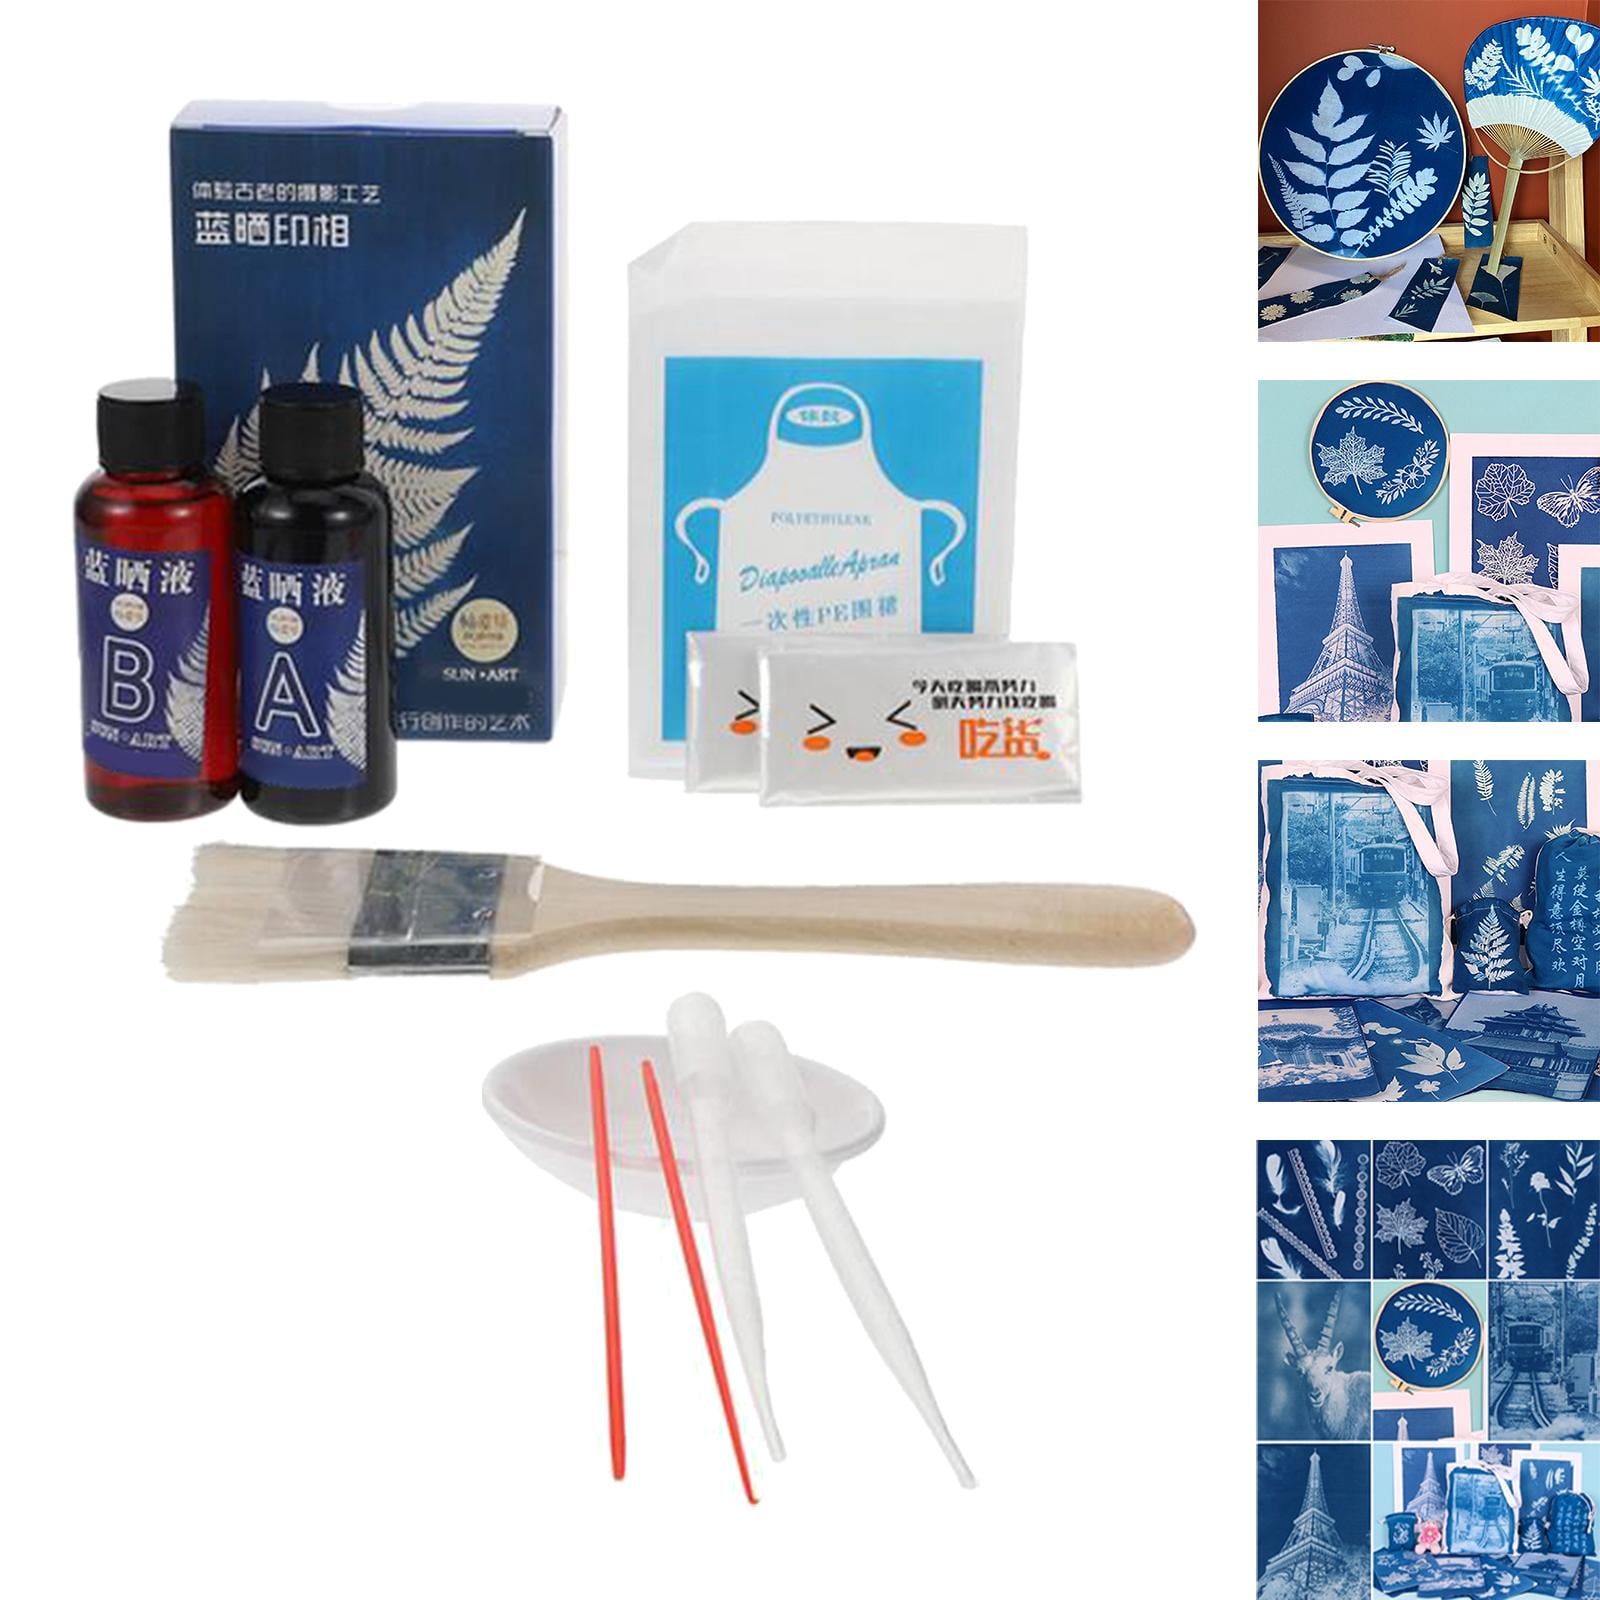 Refill Pack for your Cyanotype DIY Kit by Botanopia